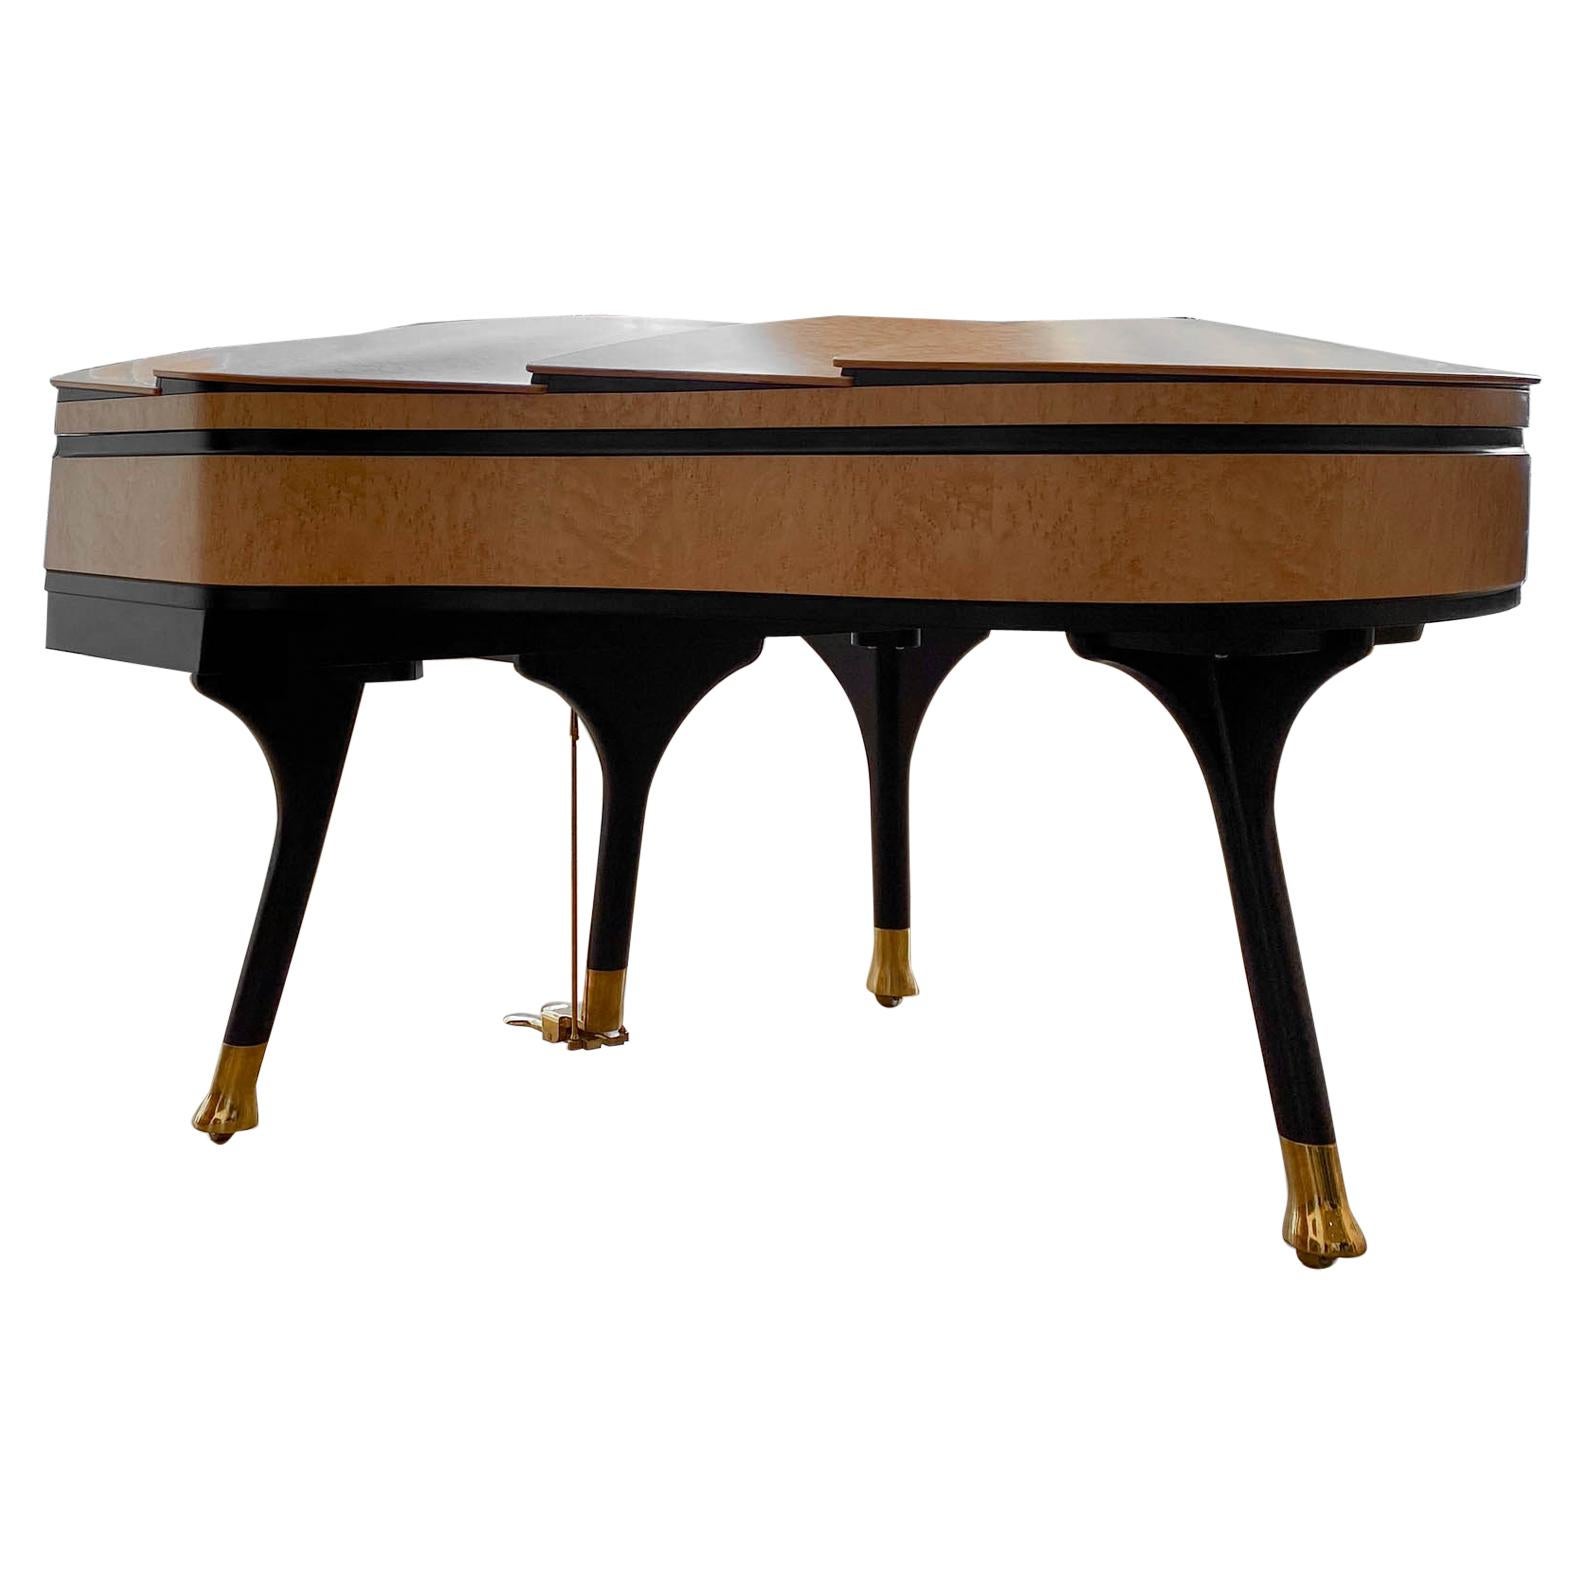 - All prices are listed ex works.
- 5 year guarantee.
- We regularly crate, ship and install PH Pianos worldwide with full insurance.

The PH Bow Grand Piano is designed by the Danish designer Poul Henningsen in 1937. This specific model comes